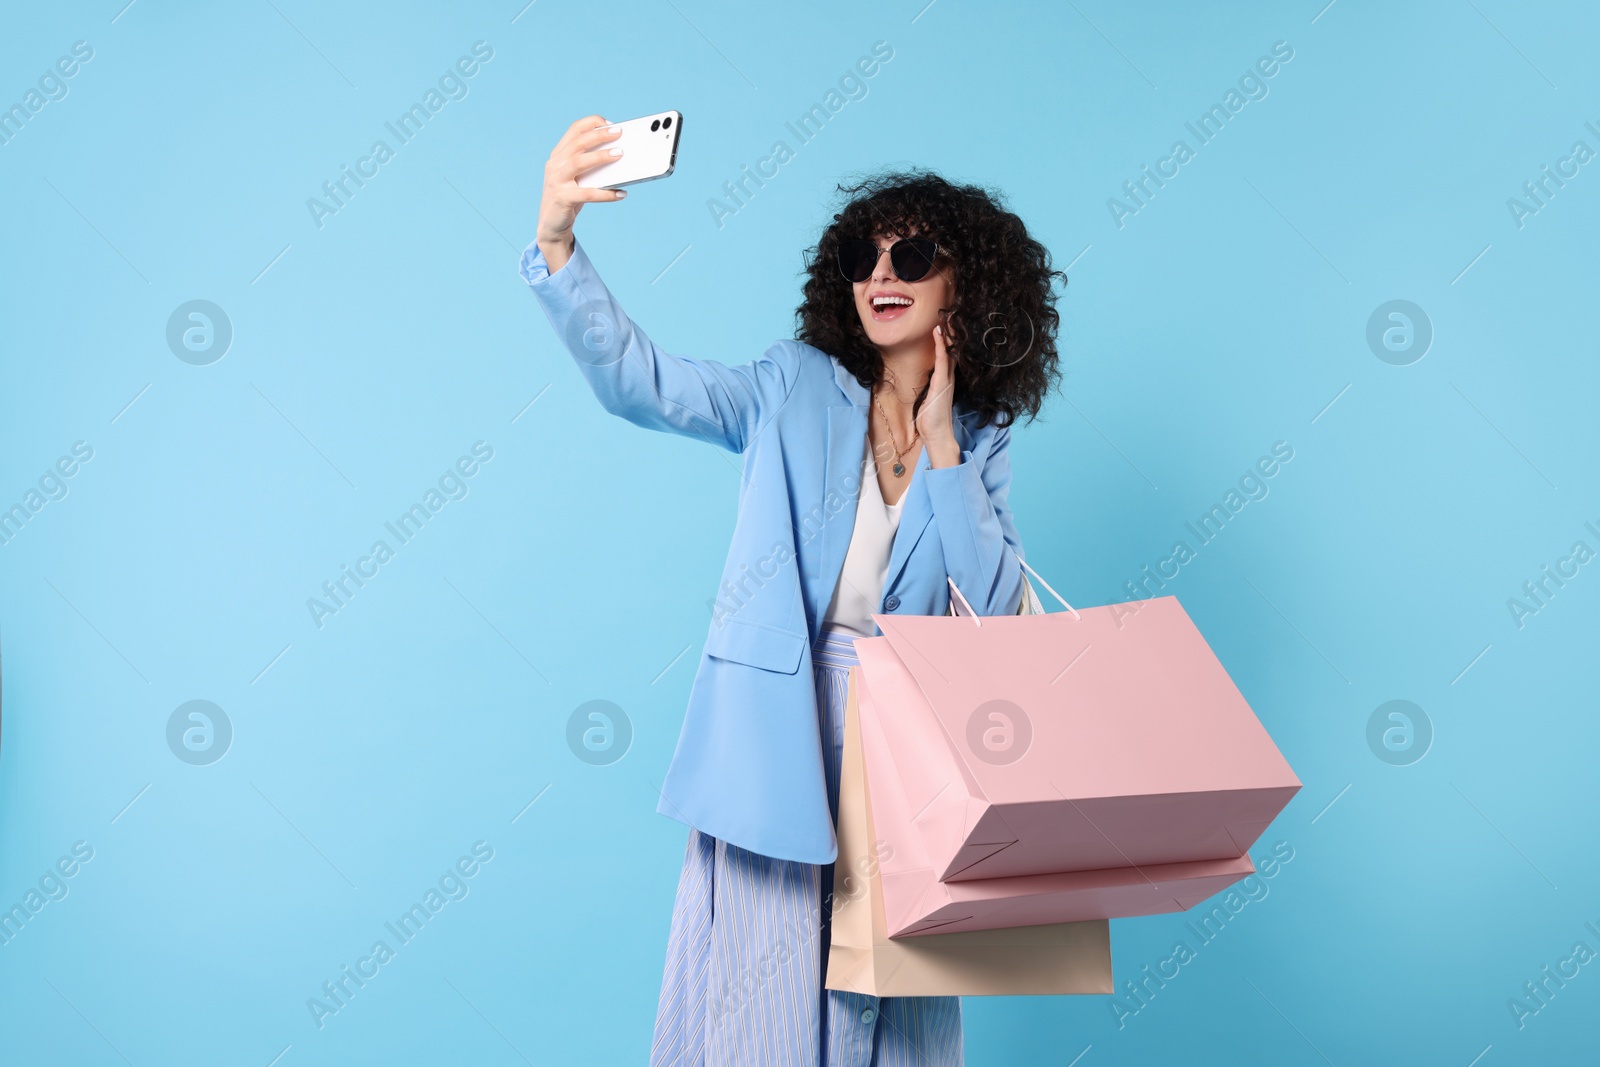 Photo of Happy young woman with shopping bags taking selfie on light blue background